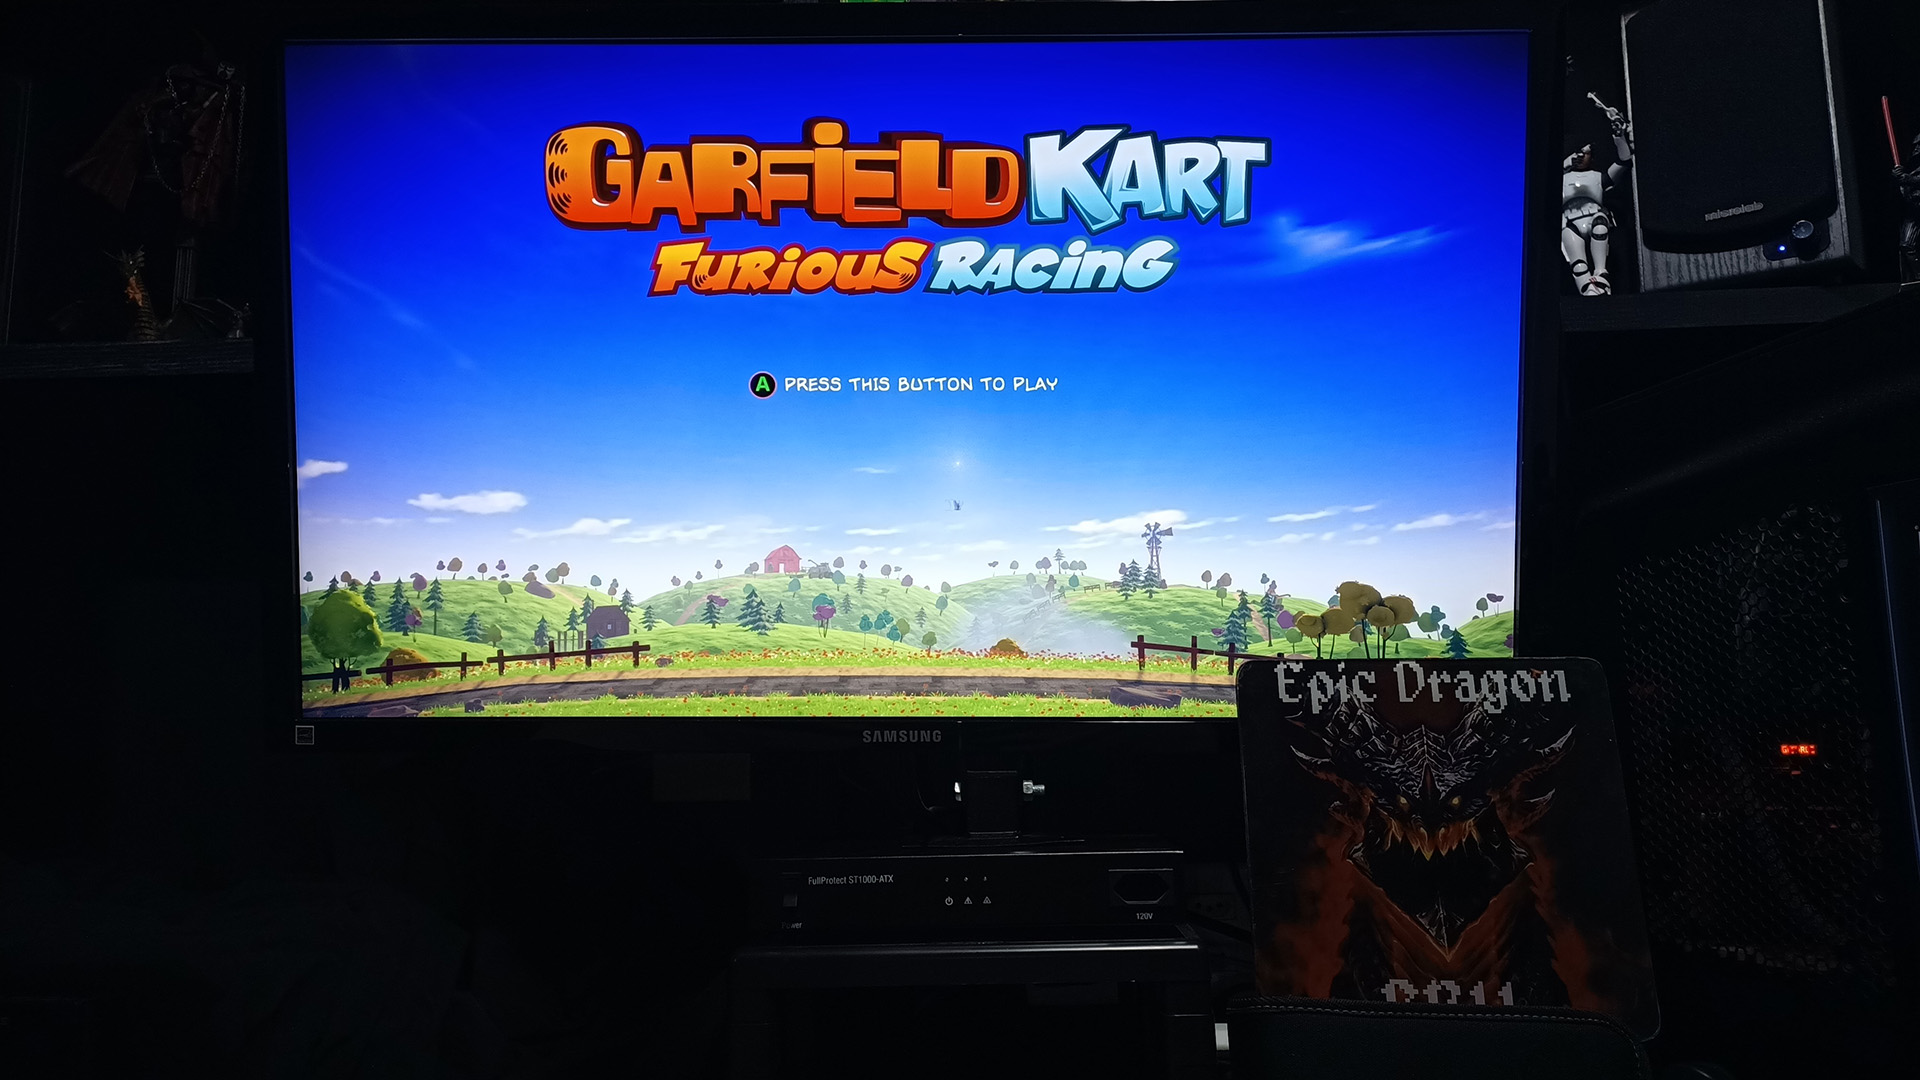 EpicDragon: Garfield Kart Furious Racing: City Slicker [Time Trial: Lap Time] (PC) 0:00:40.268 points on 2022-08-05 17:32:21